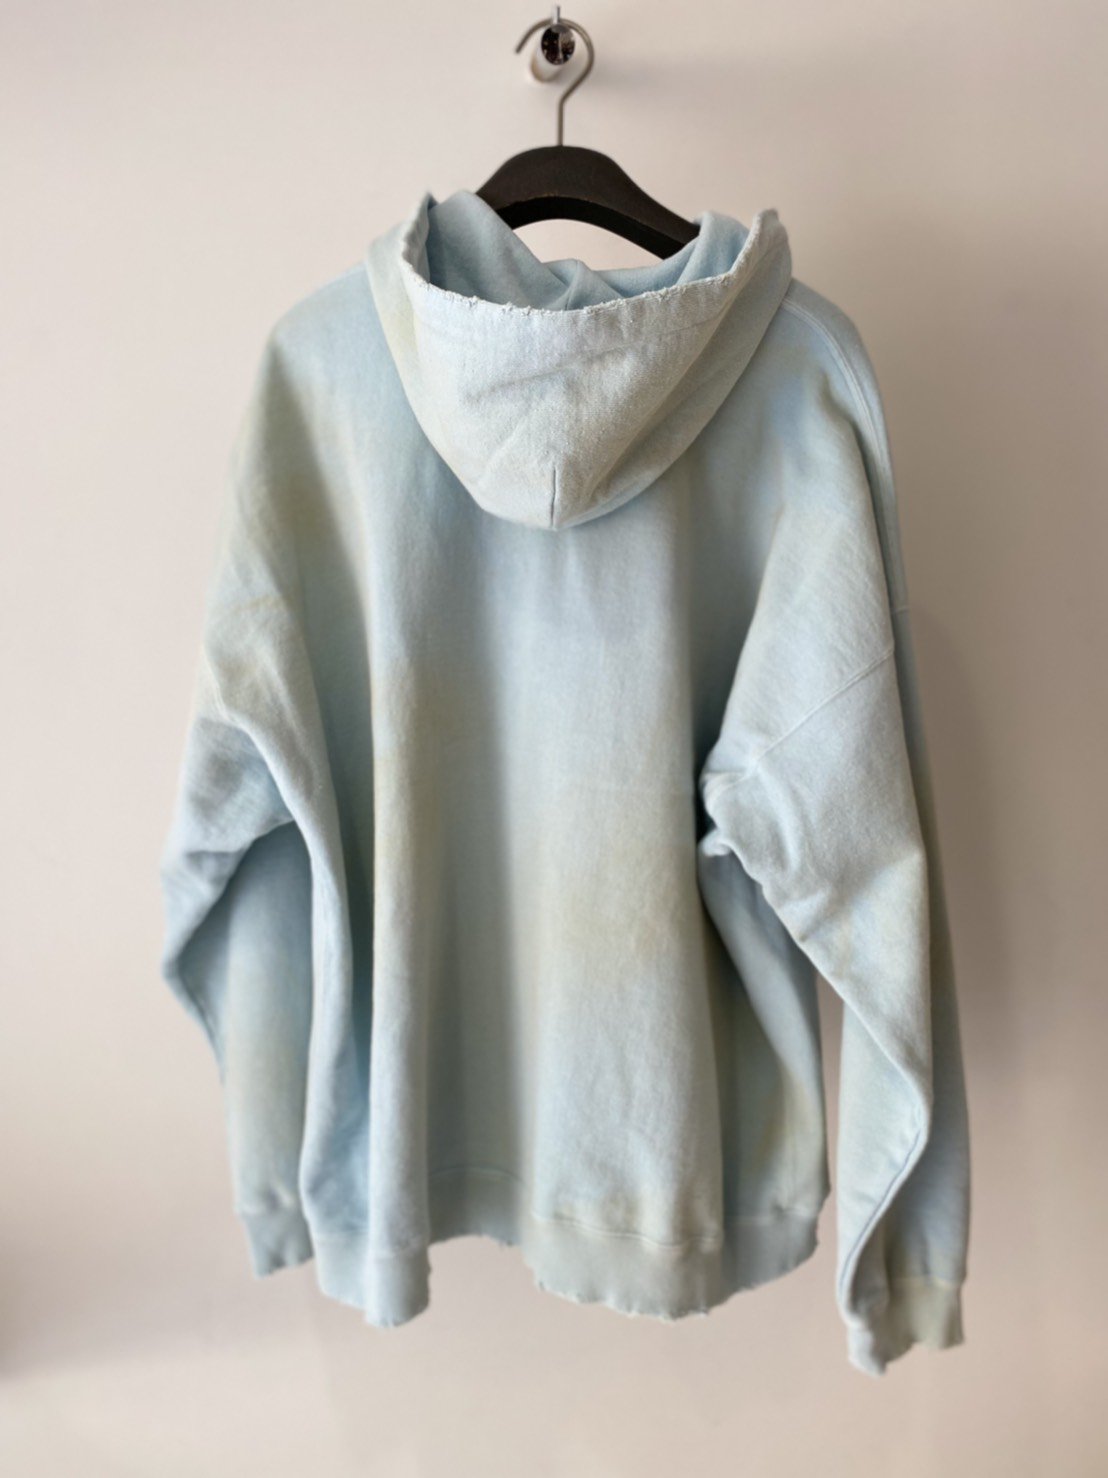 DAIRIKU<br />[40%off] Ponyboy Cut off Hoodie / Youth Blue <img class='new_mark_img2' src='https://img.shop-pro.jp/img/new/icons20.gif' style='border:none;display:inline;margin:0px;padding:0px;width:auto;' />